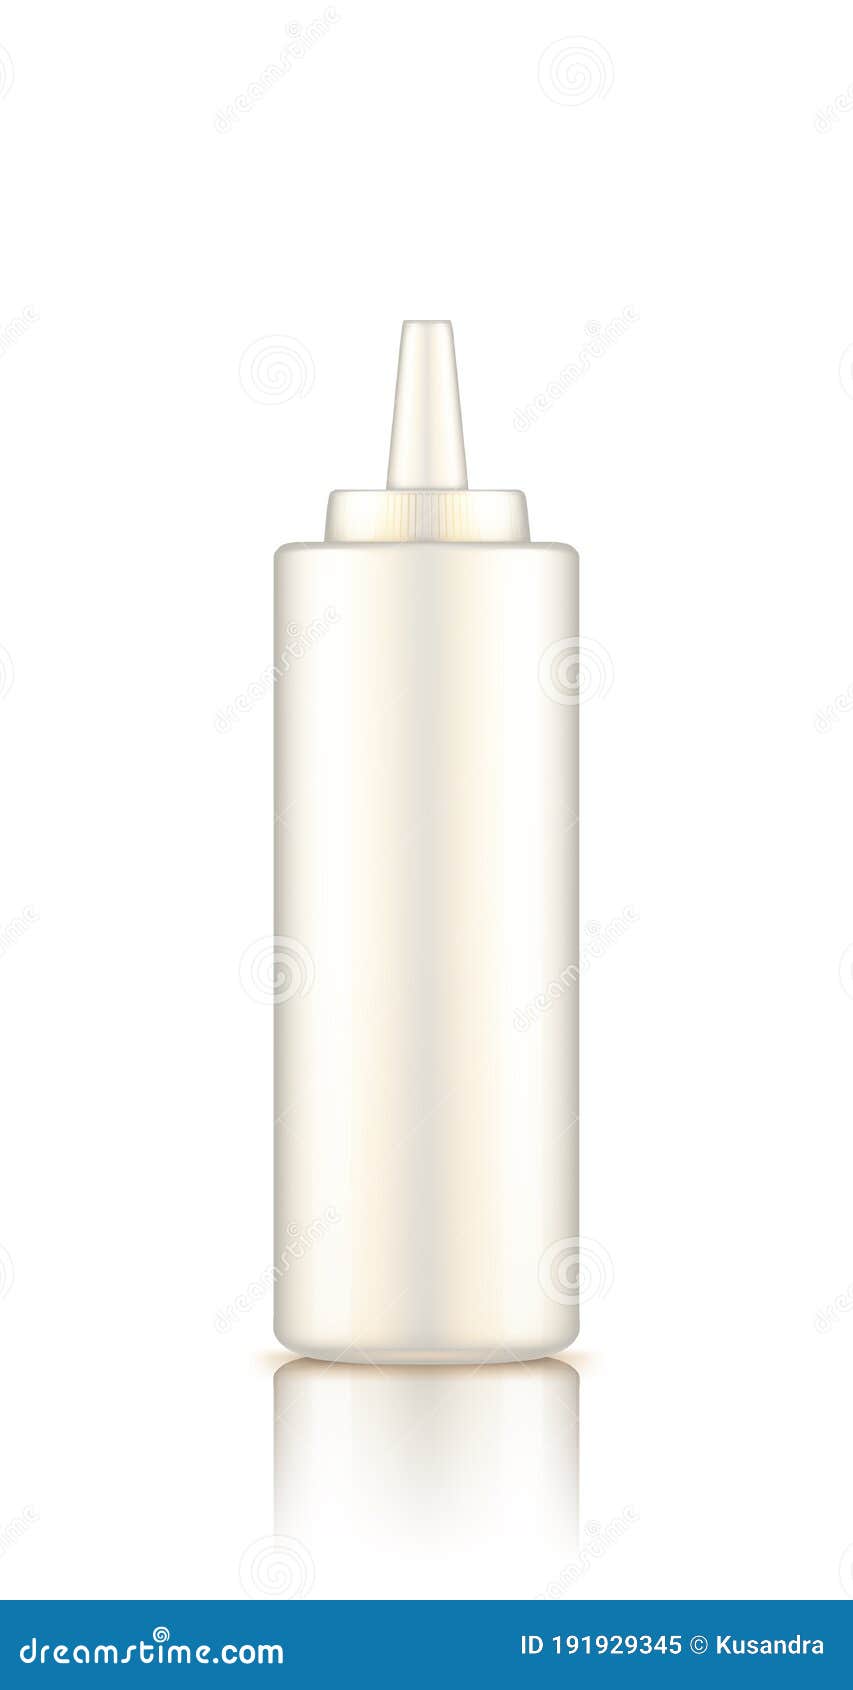 Download White Plastic Squeeze Mayo Bottle With Cap Mockup Stock ...